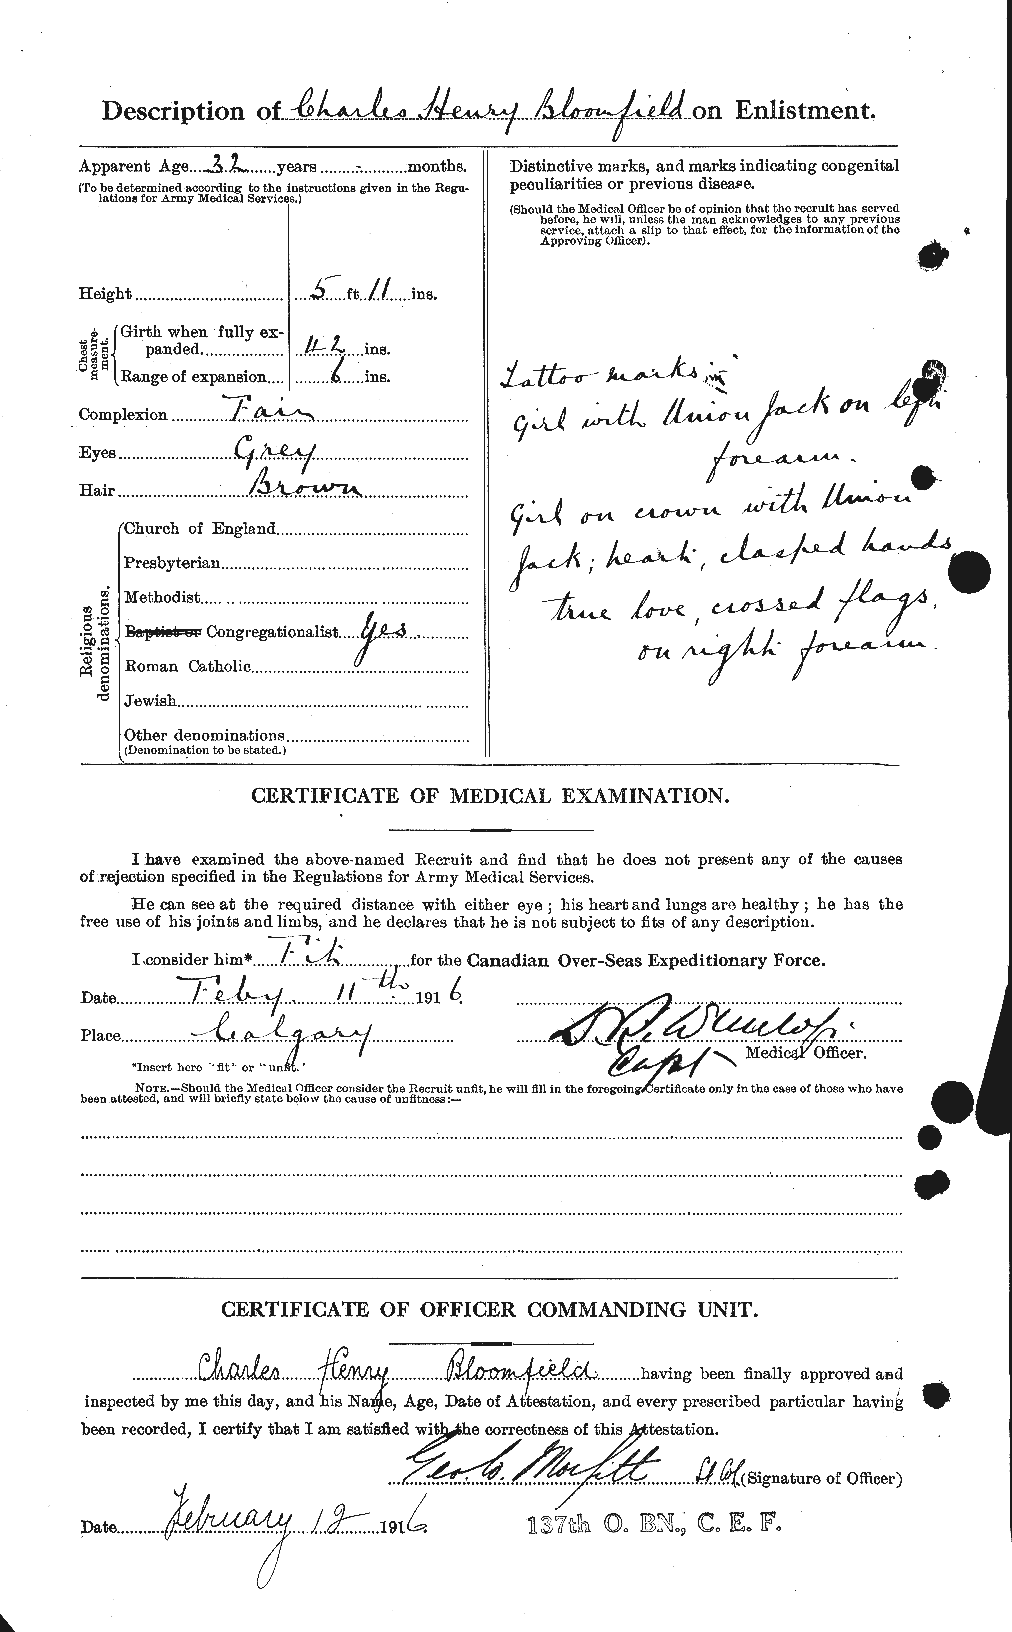 Personnel Records of the First World War - CEF 248604b